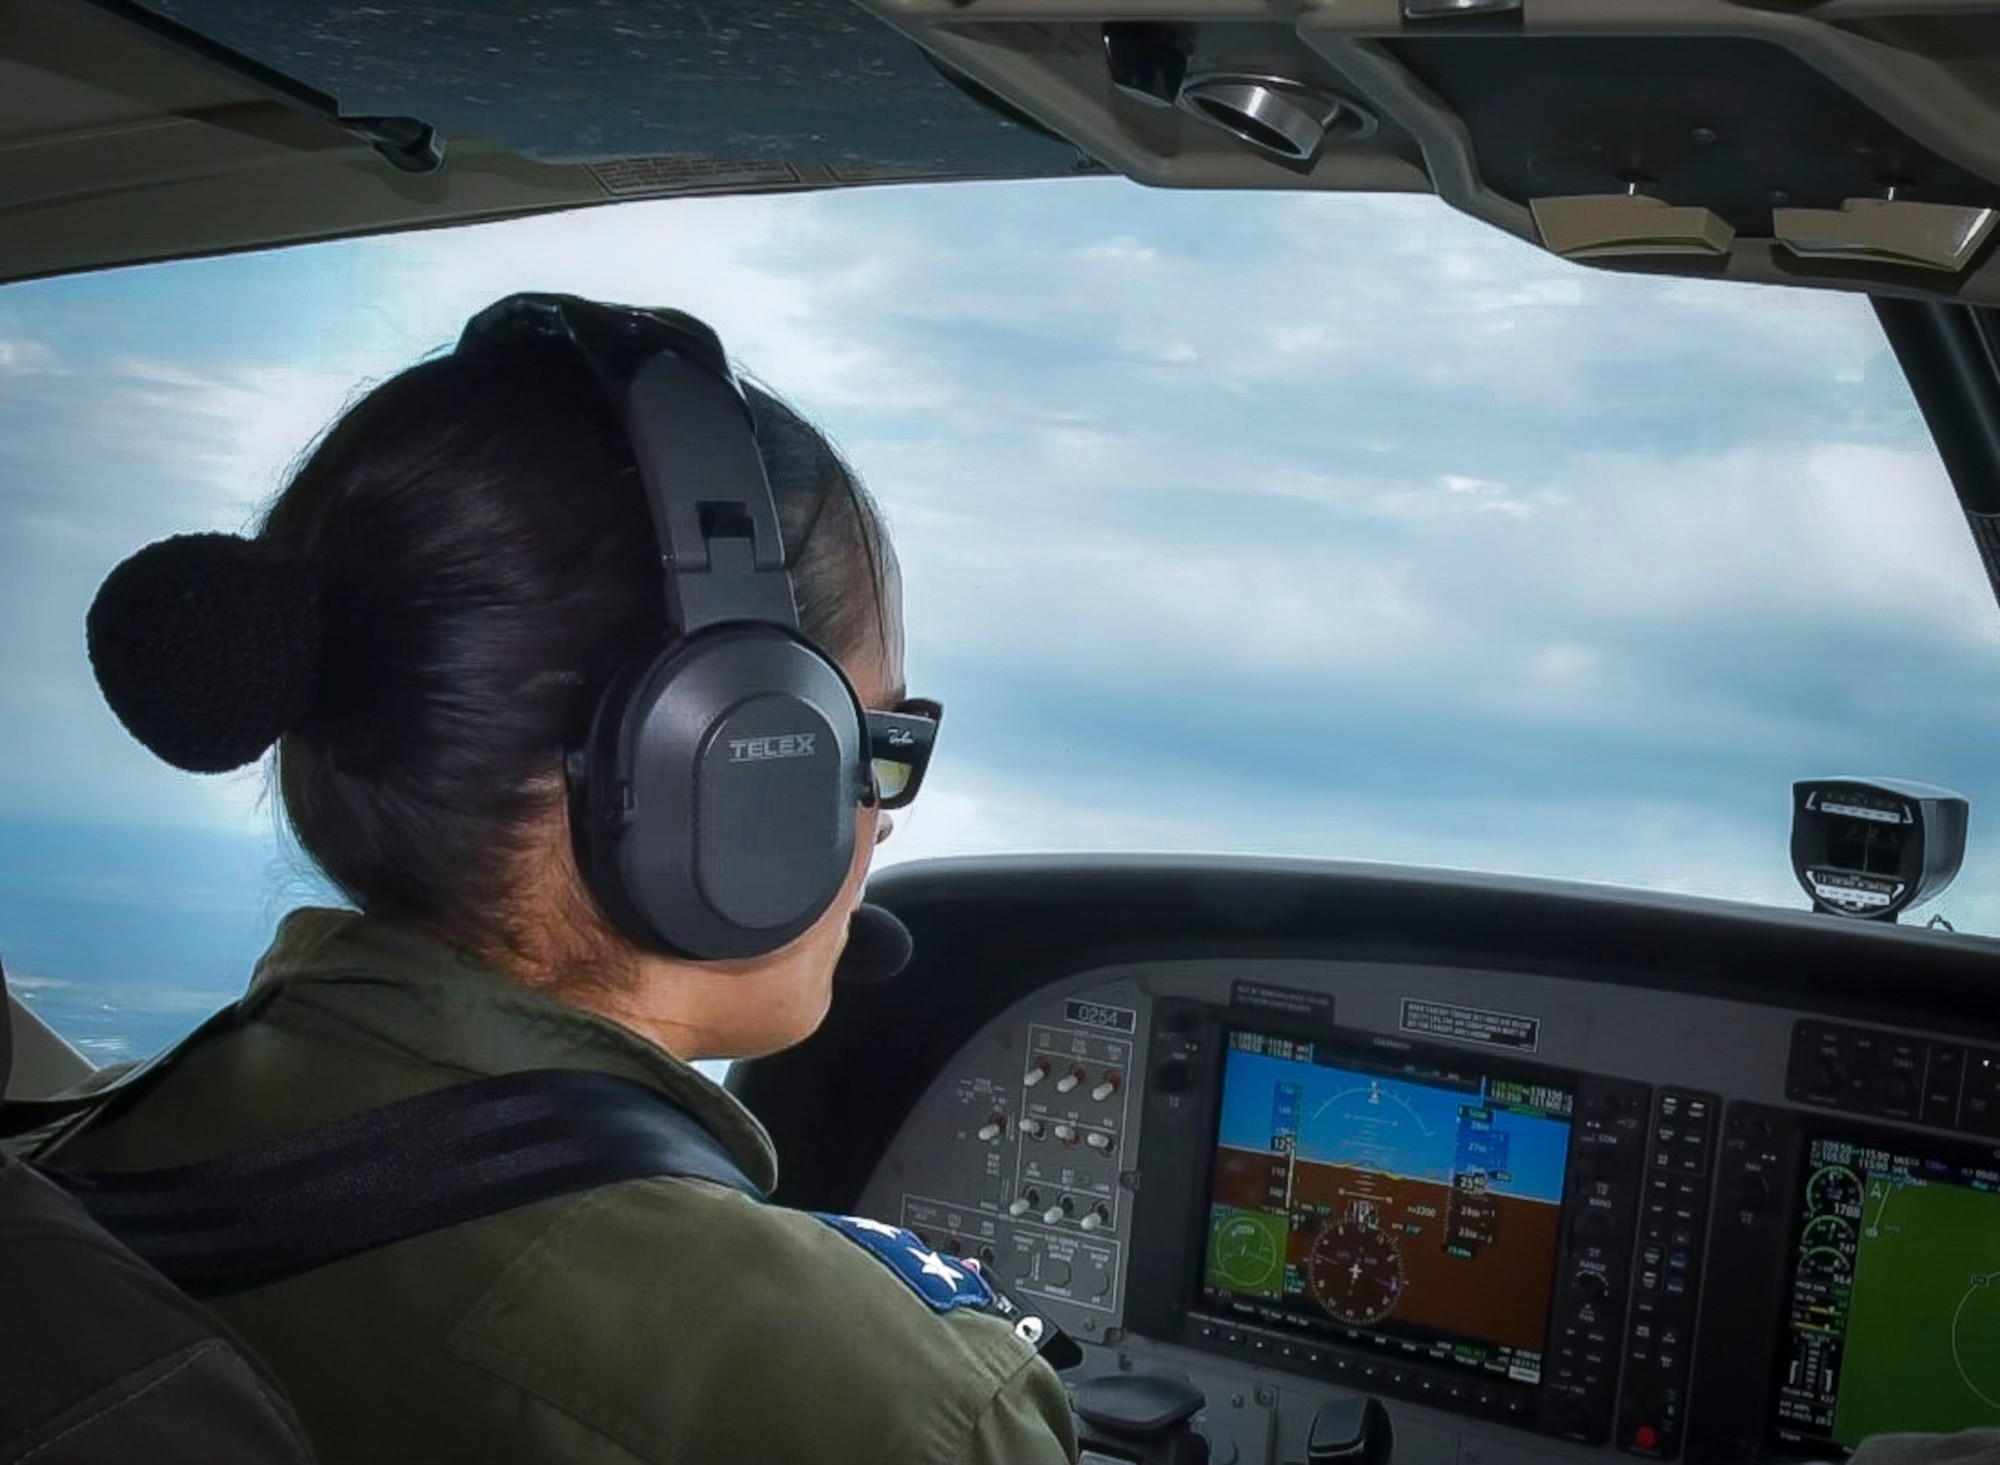 Fuerza Aèrea Paraguaya’s (FAP) Capt. Maria Jara, a FAP instructor pilot, flies a Cessna 402 aircraft during a training exercise with the 571st Mobility Support Squadron (MSAS), Sept. 15, 2022, over Paraguay. The 571st MSAS visited Paraguay to train their Air Force and build partnership capacity. During their visit, the first flight between the two Air Force units was operated and completed solely by an all-female aircrew and led by a female Paraguayan pilot. (Courtesy Photo)